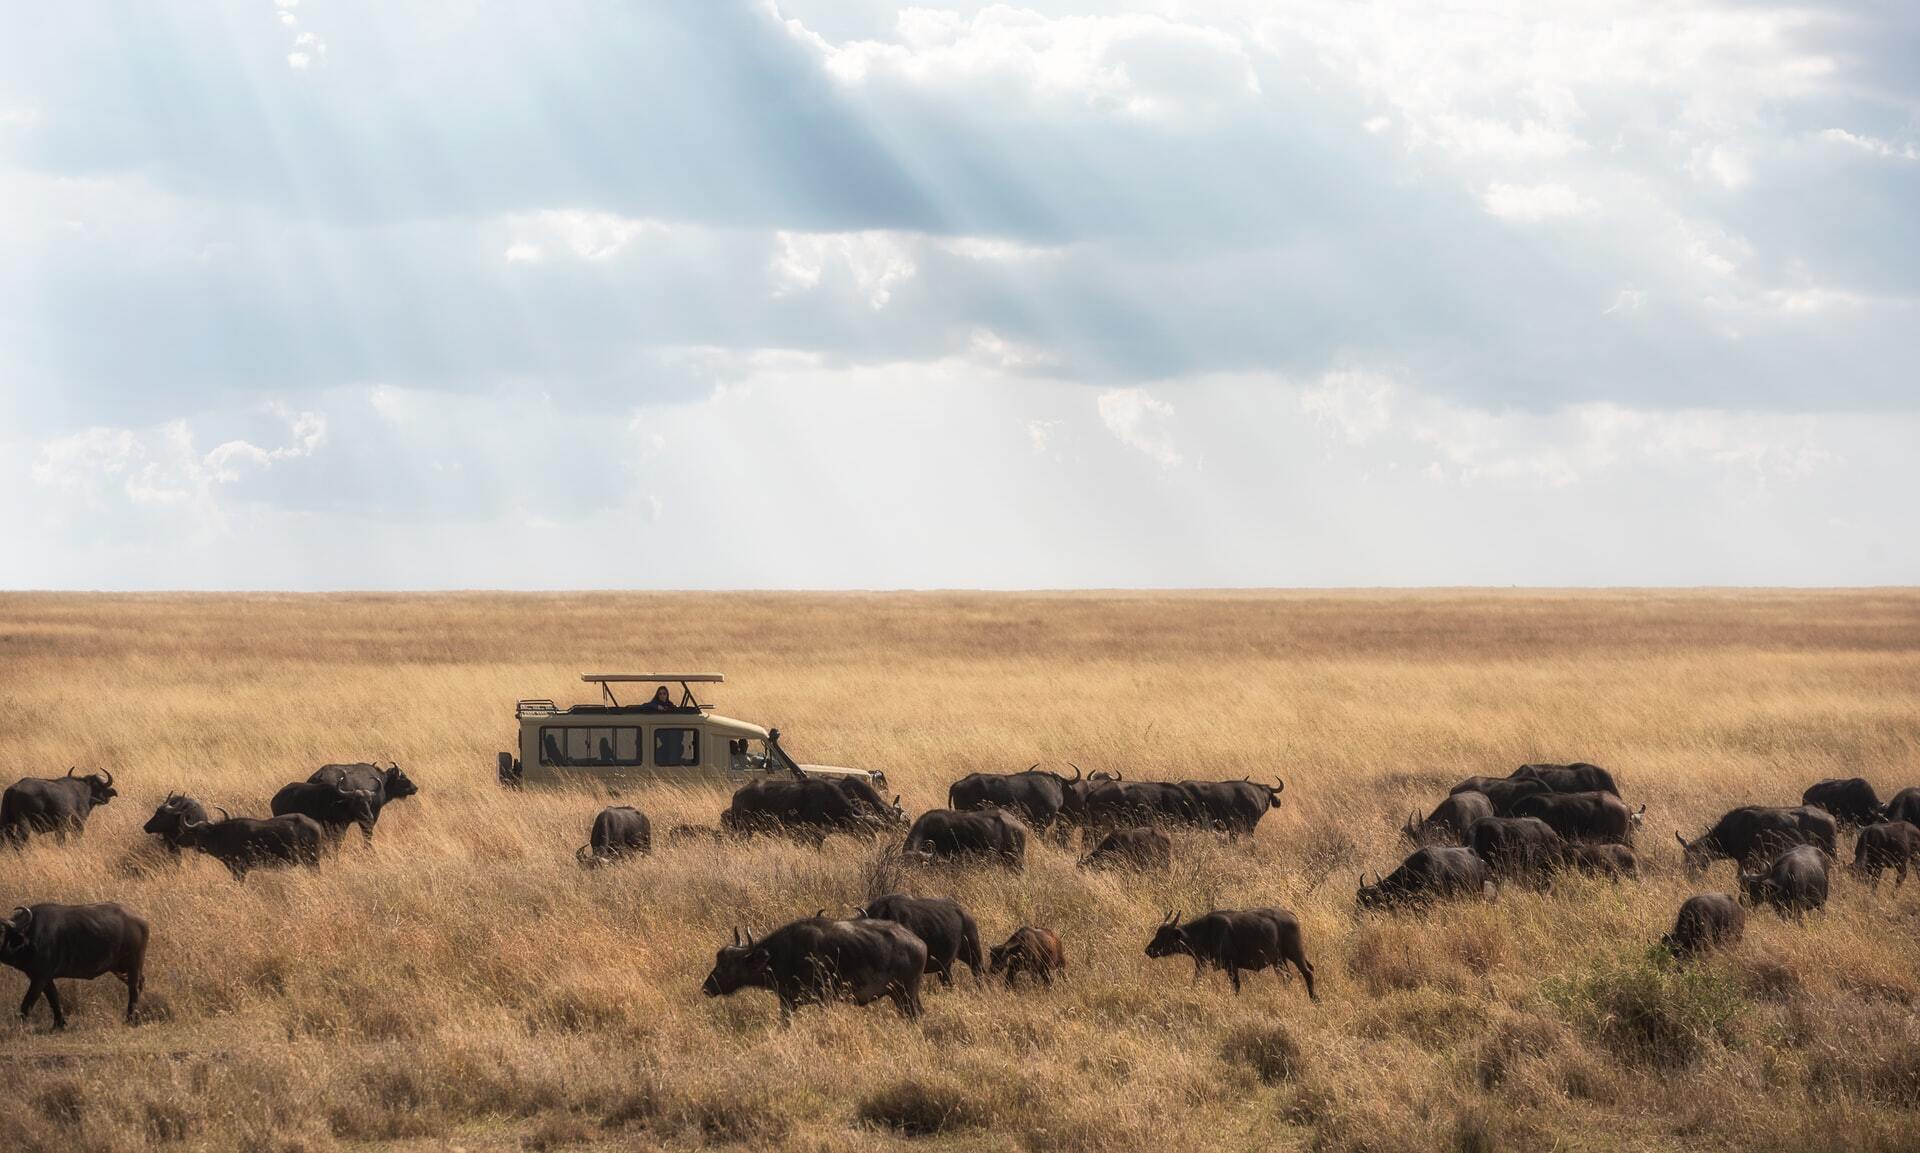 Tips for spotting Africa’s Big 5